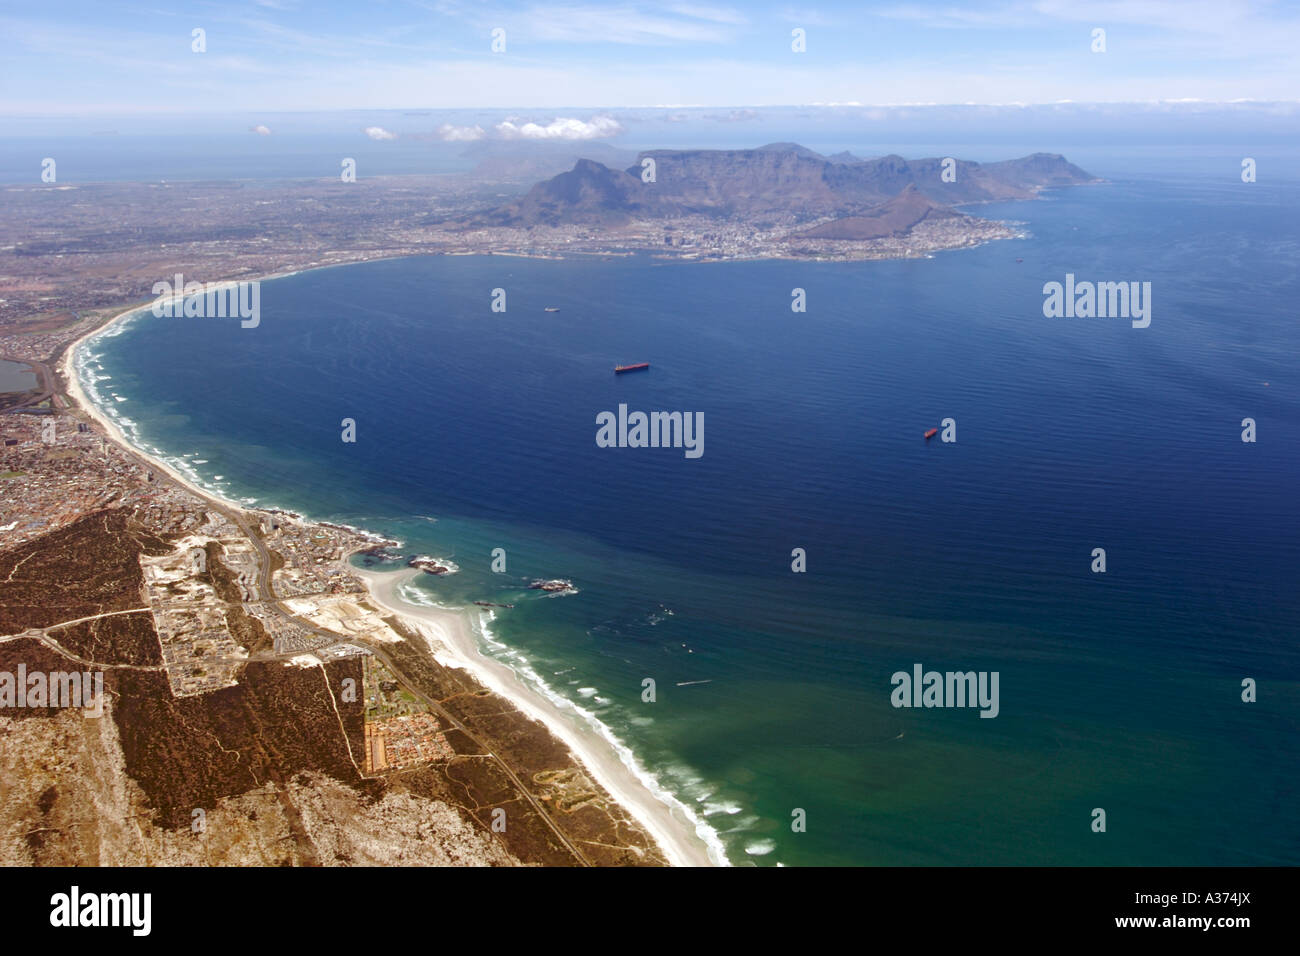 View over the city of Cape Town South Africa from the window of a Virgin Atlantic passenger jet. Stock Photo